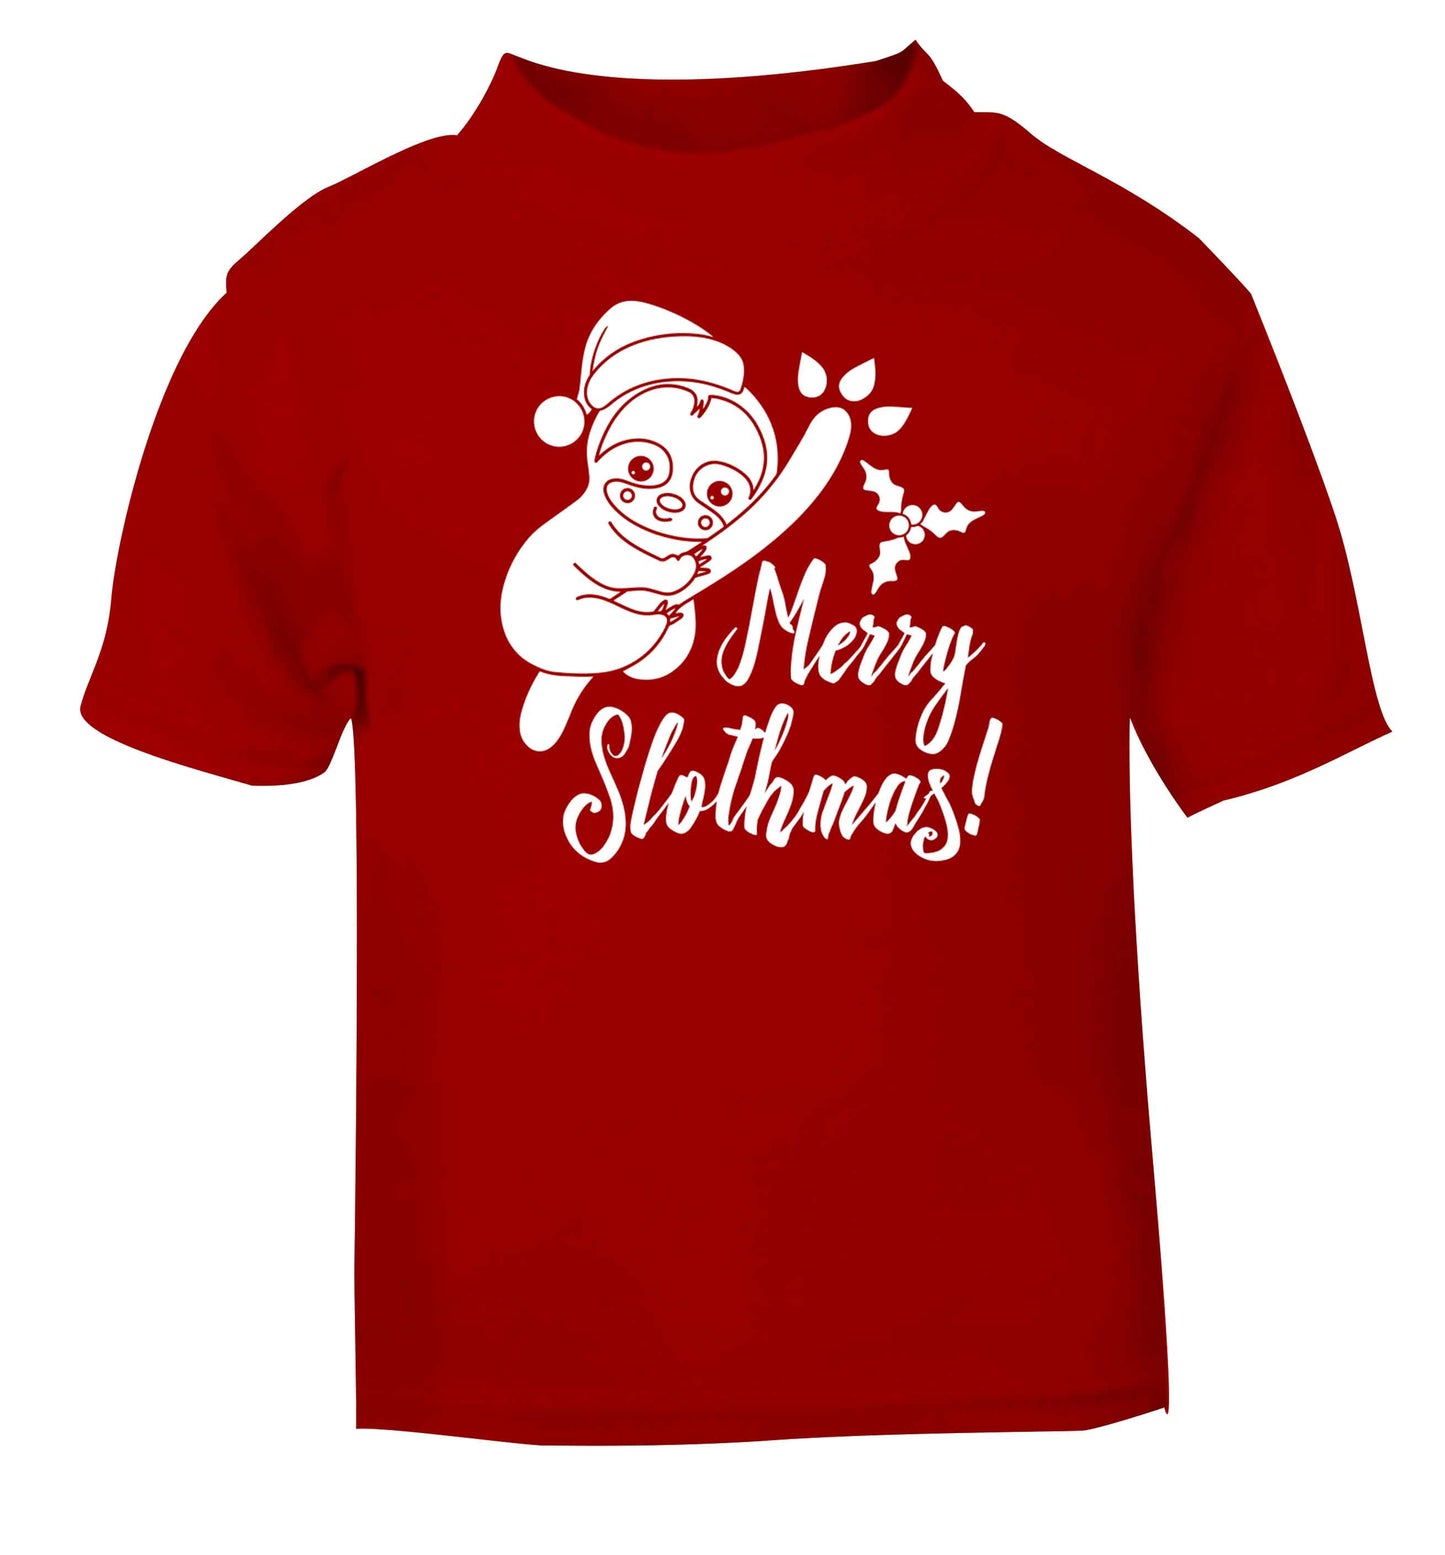 Merry Slothmas red baby toddler Tshirt 2 Years